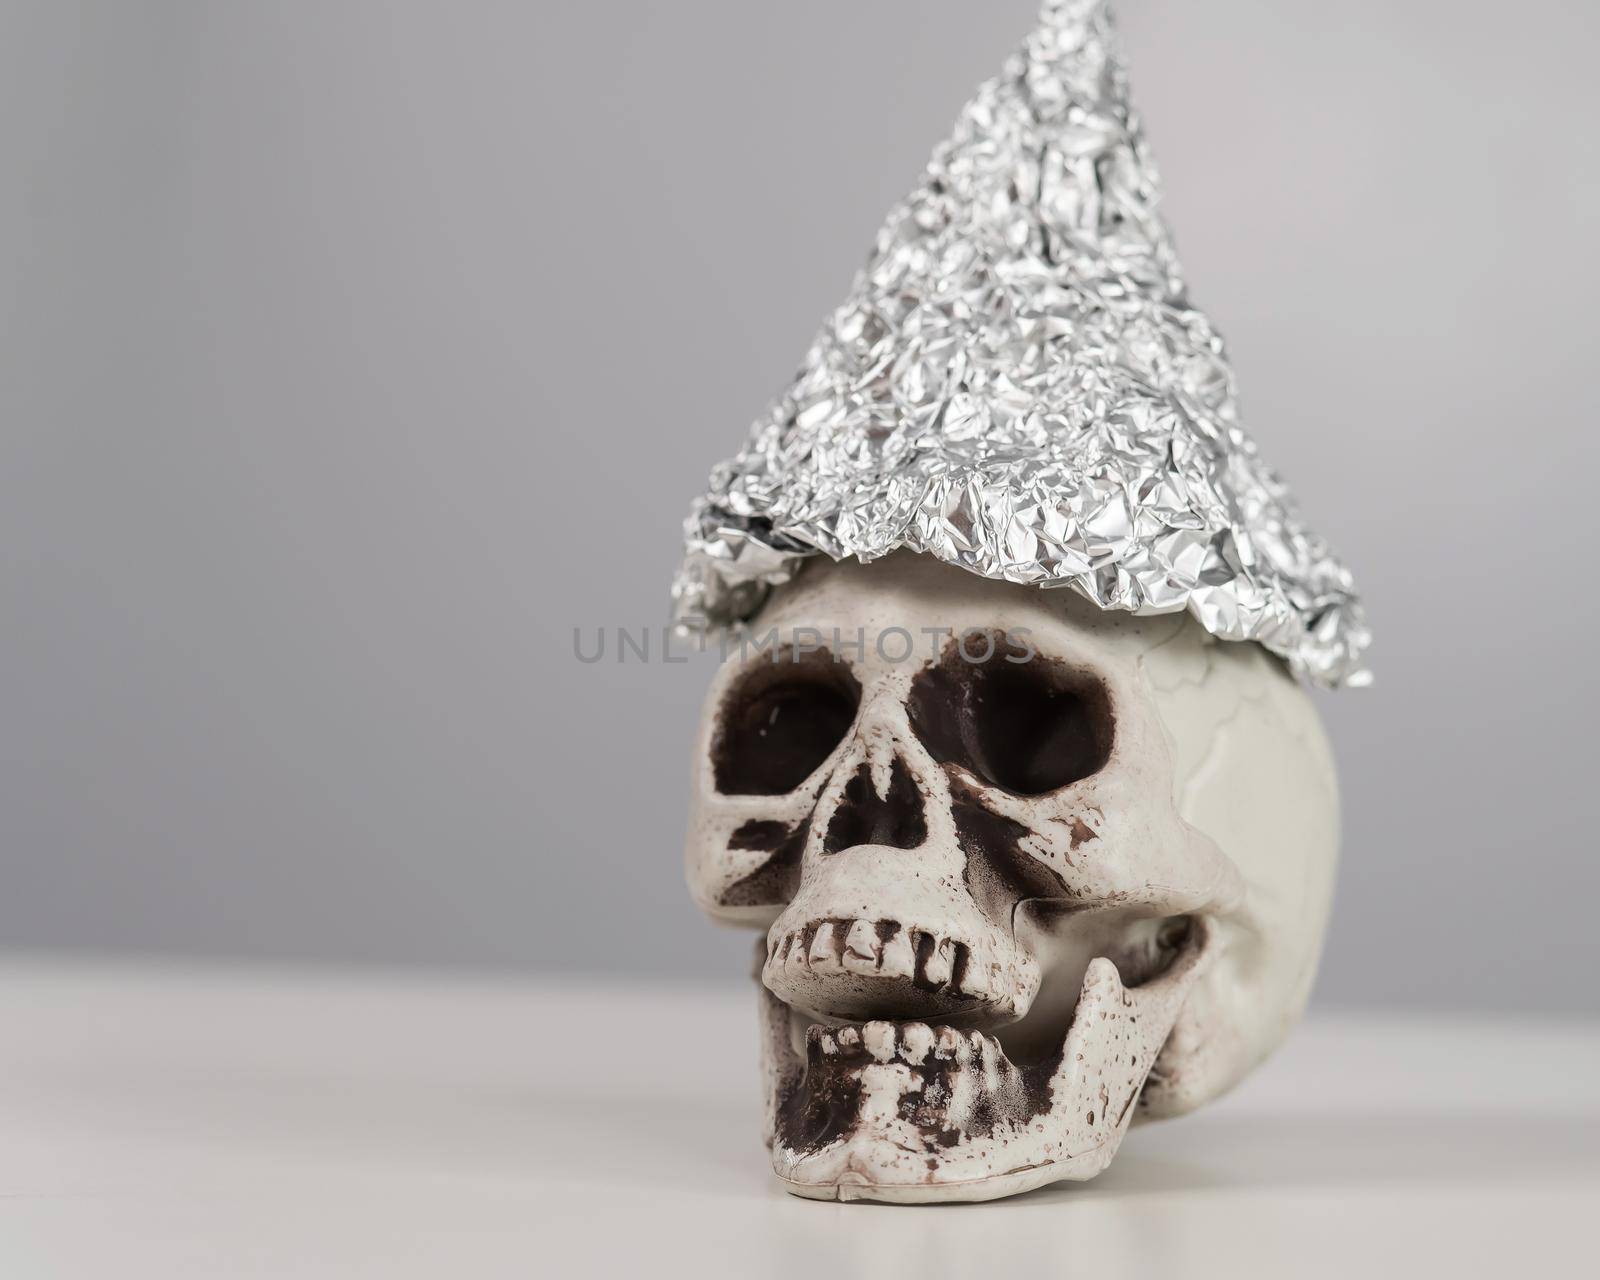 Plastic skull in a tinfoil cap on a white background